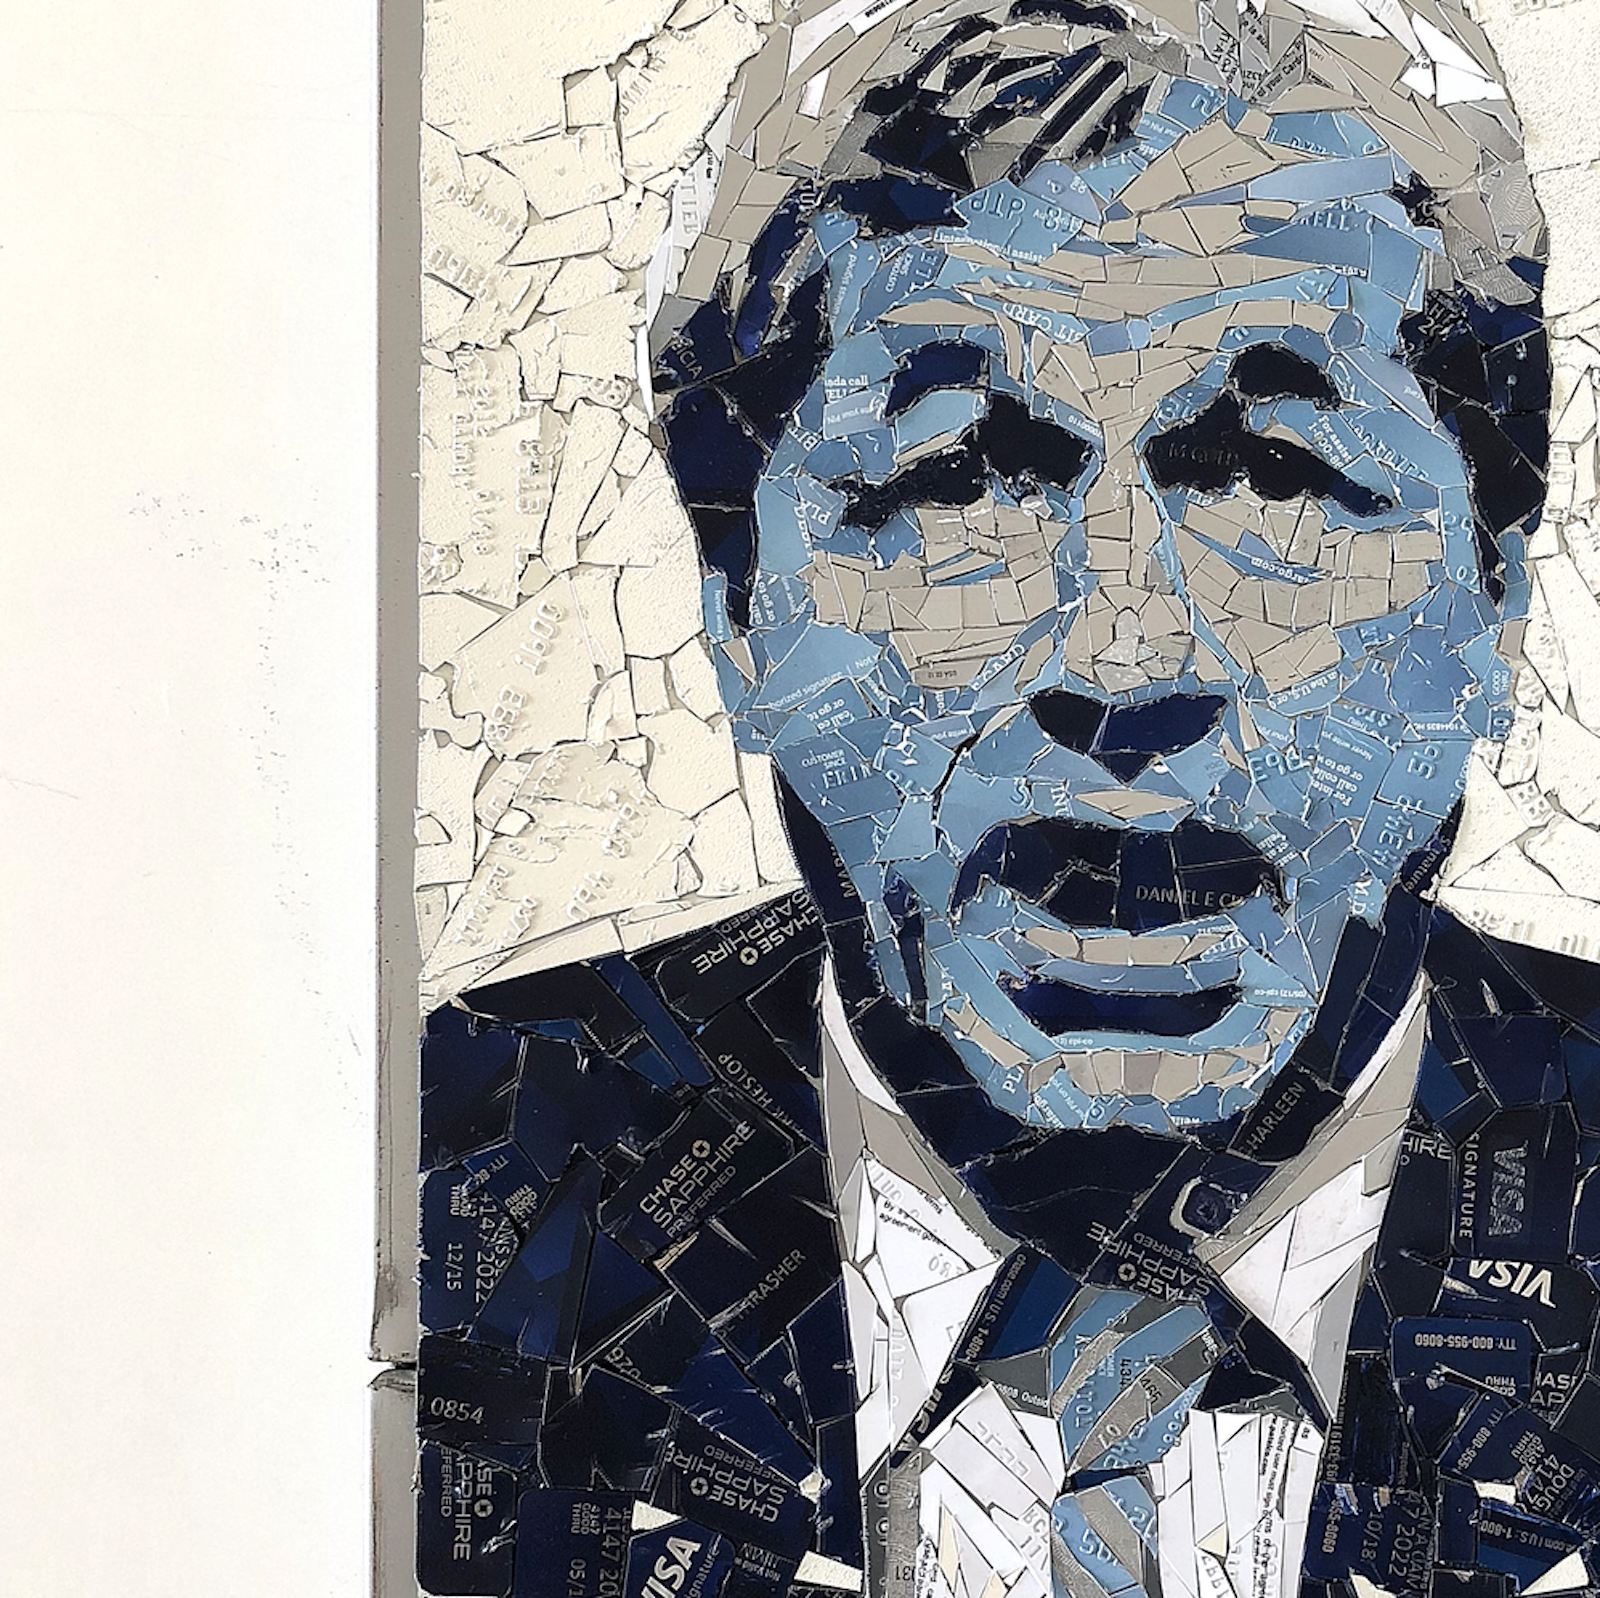 You Can Now Bid for Jamie Dimon Crypto Art Made From Old Credit Cards